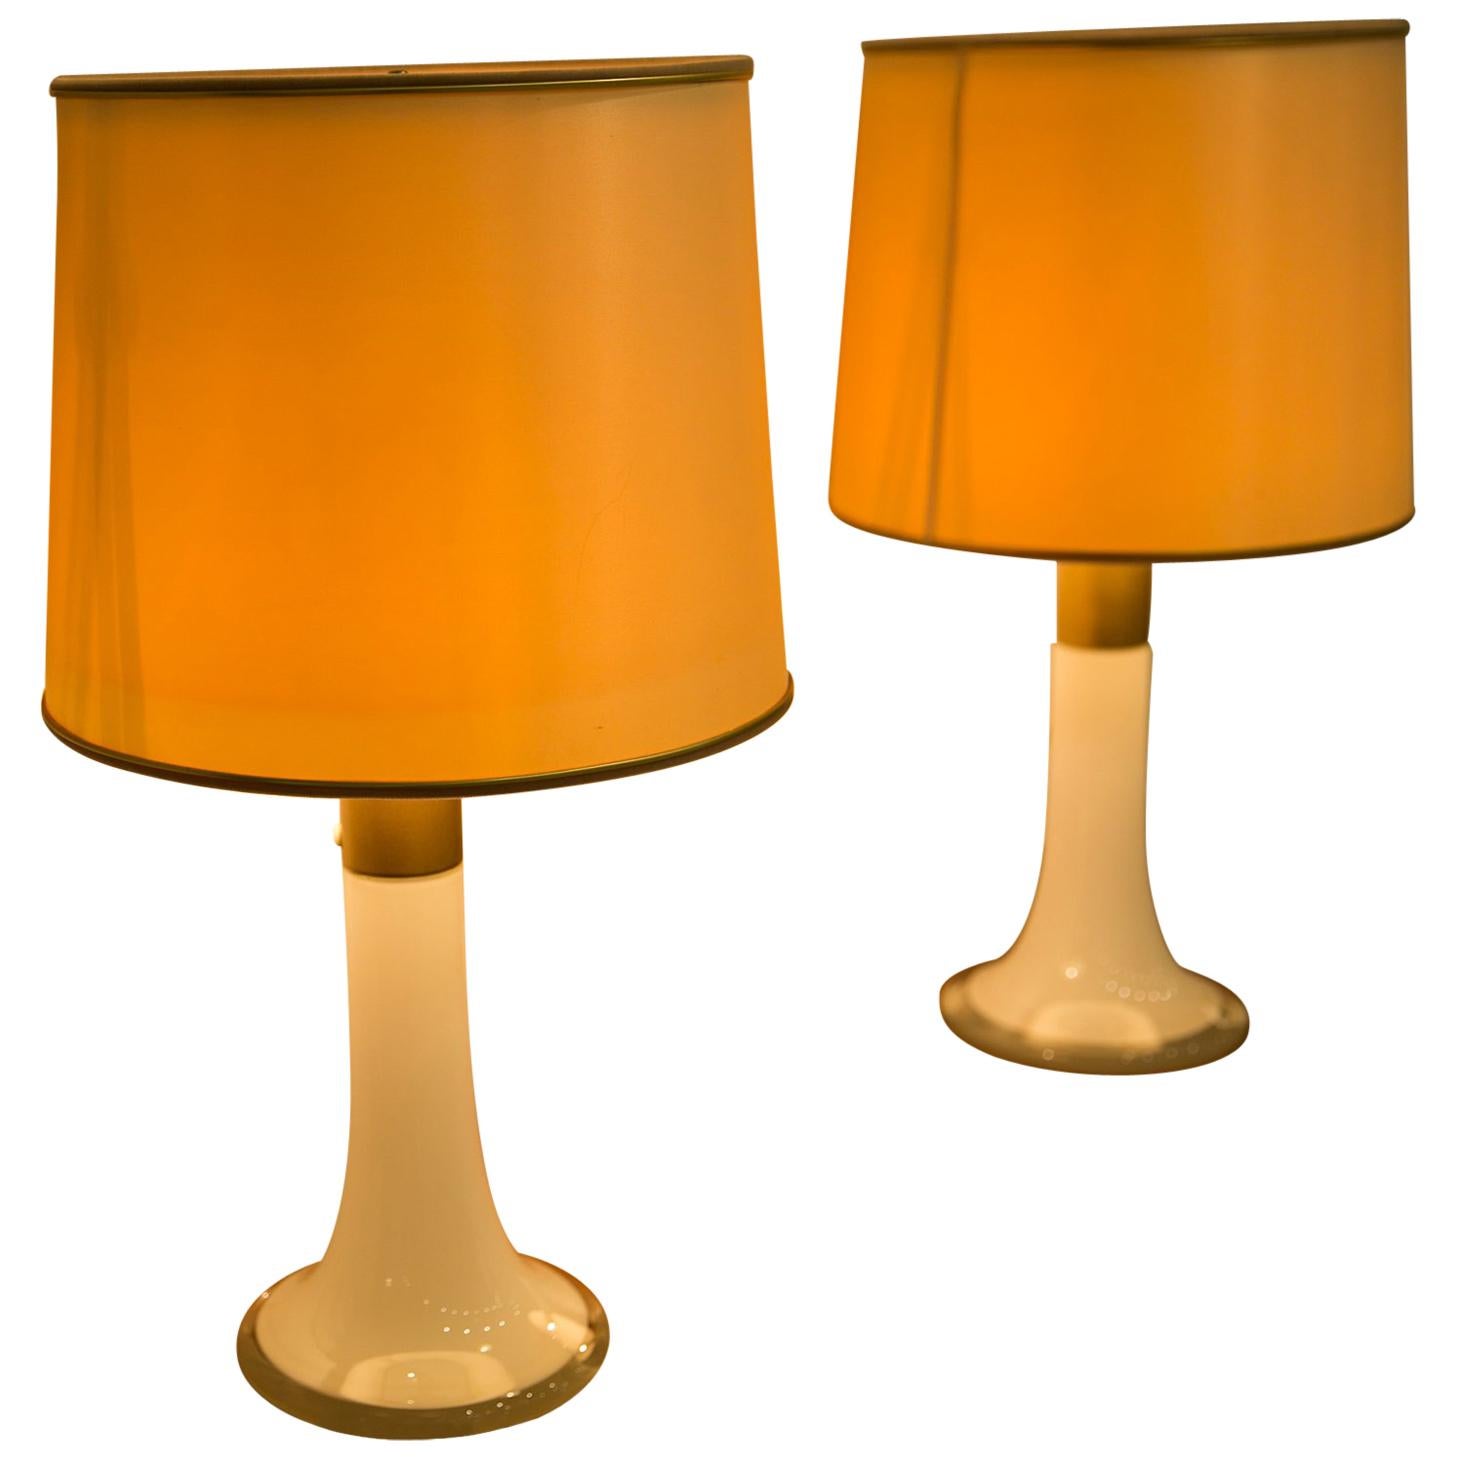 Pair of Table Lamp Model 46-017 by Lisa Johansson Pape for Stockmann Orno, 1950s